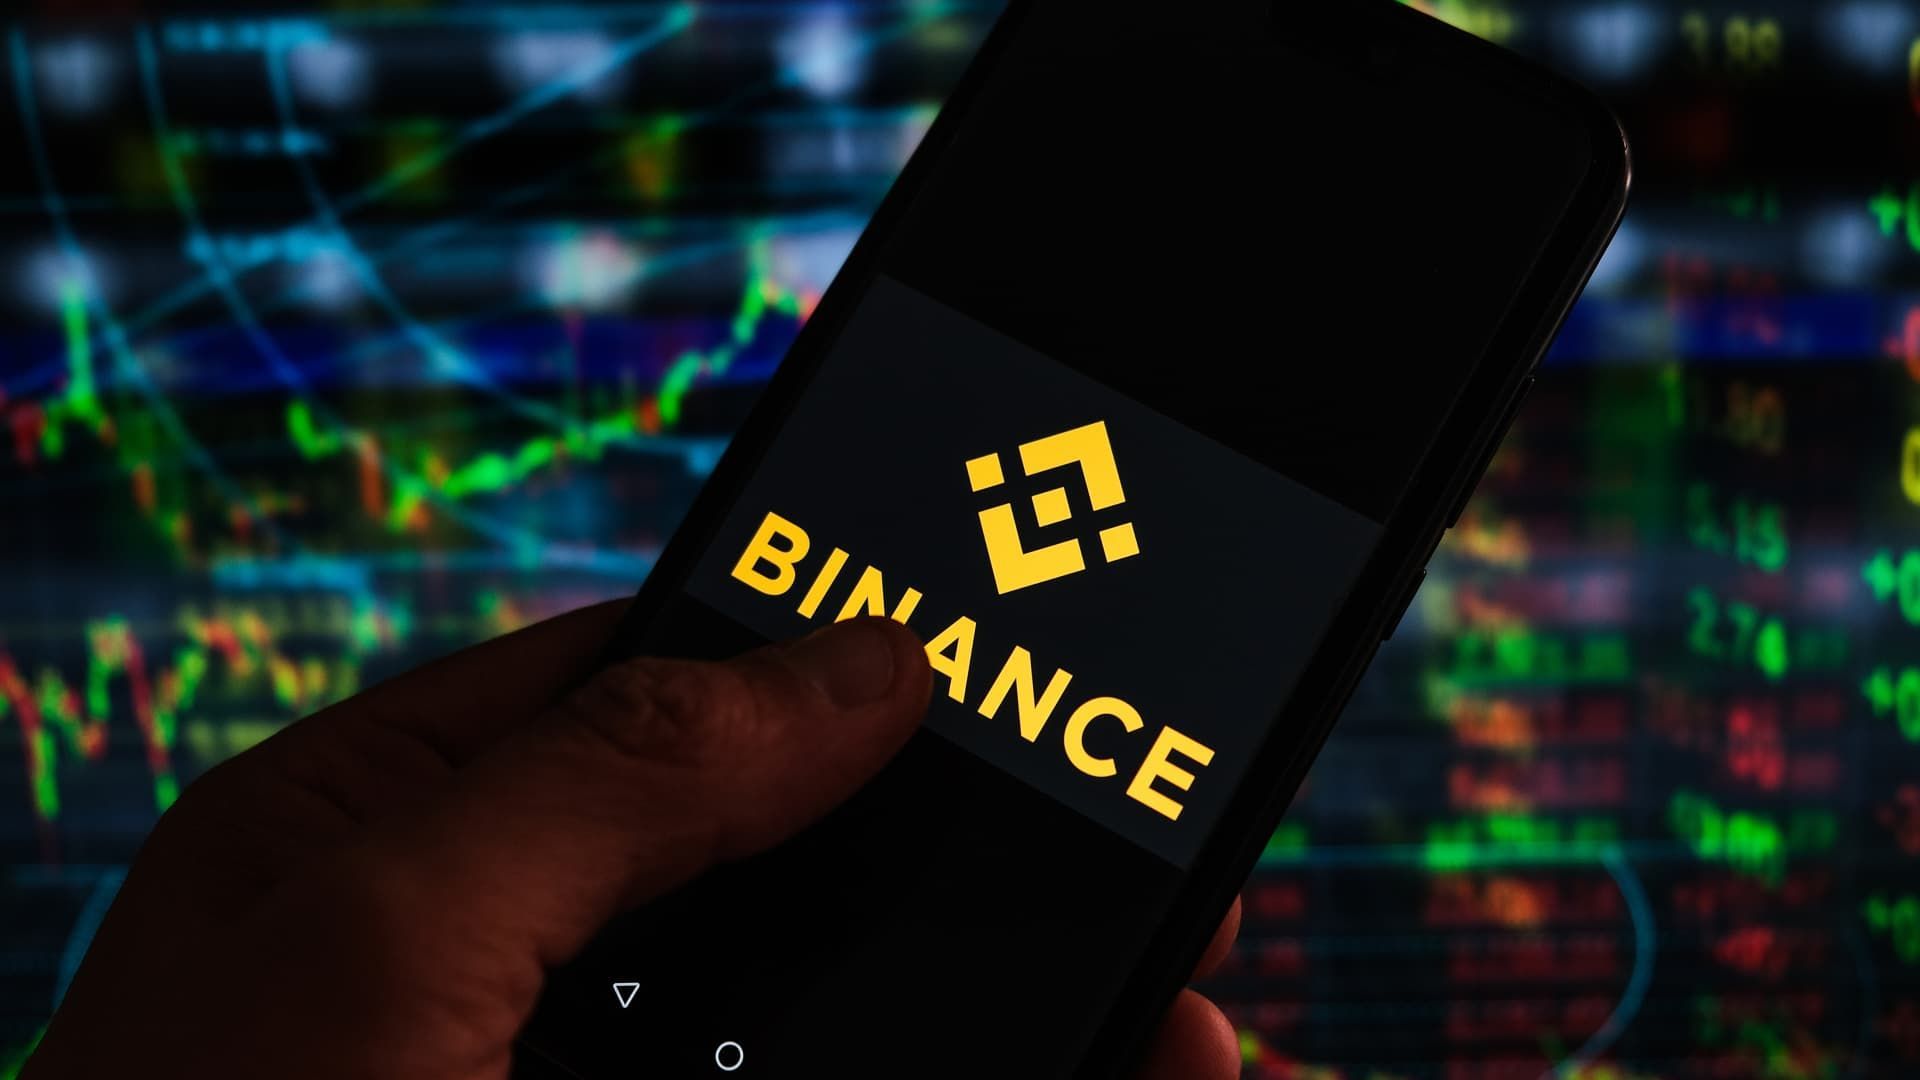 Binance WOTD: Word of the day answers (March 3, 2023)